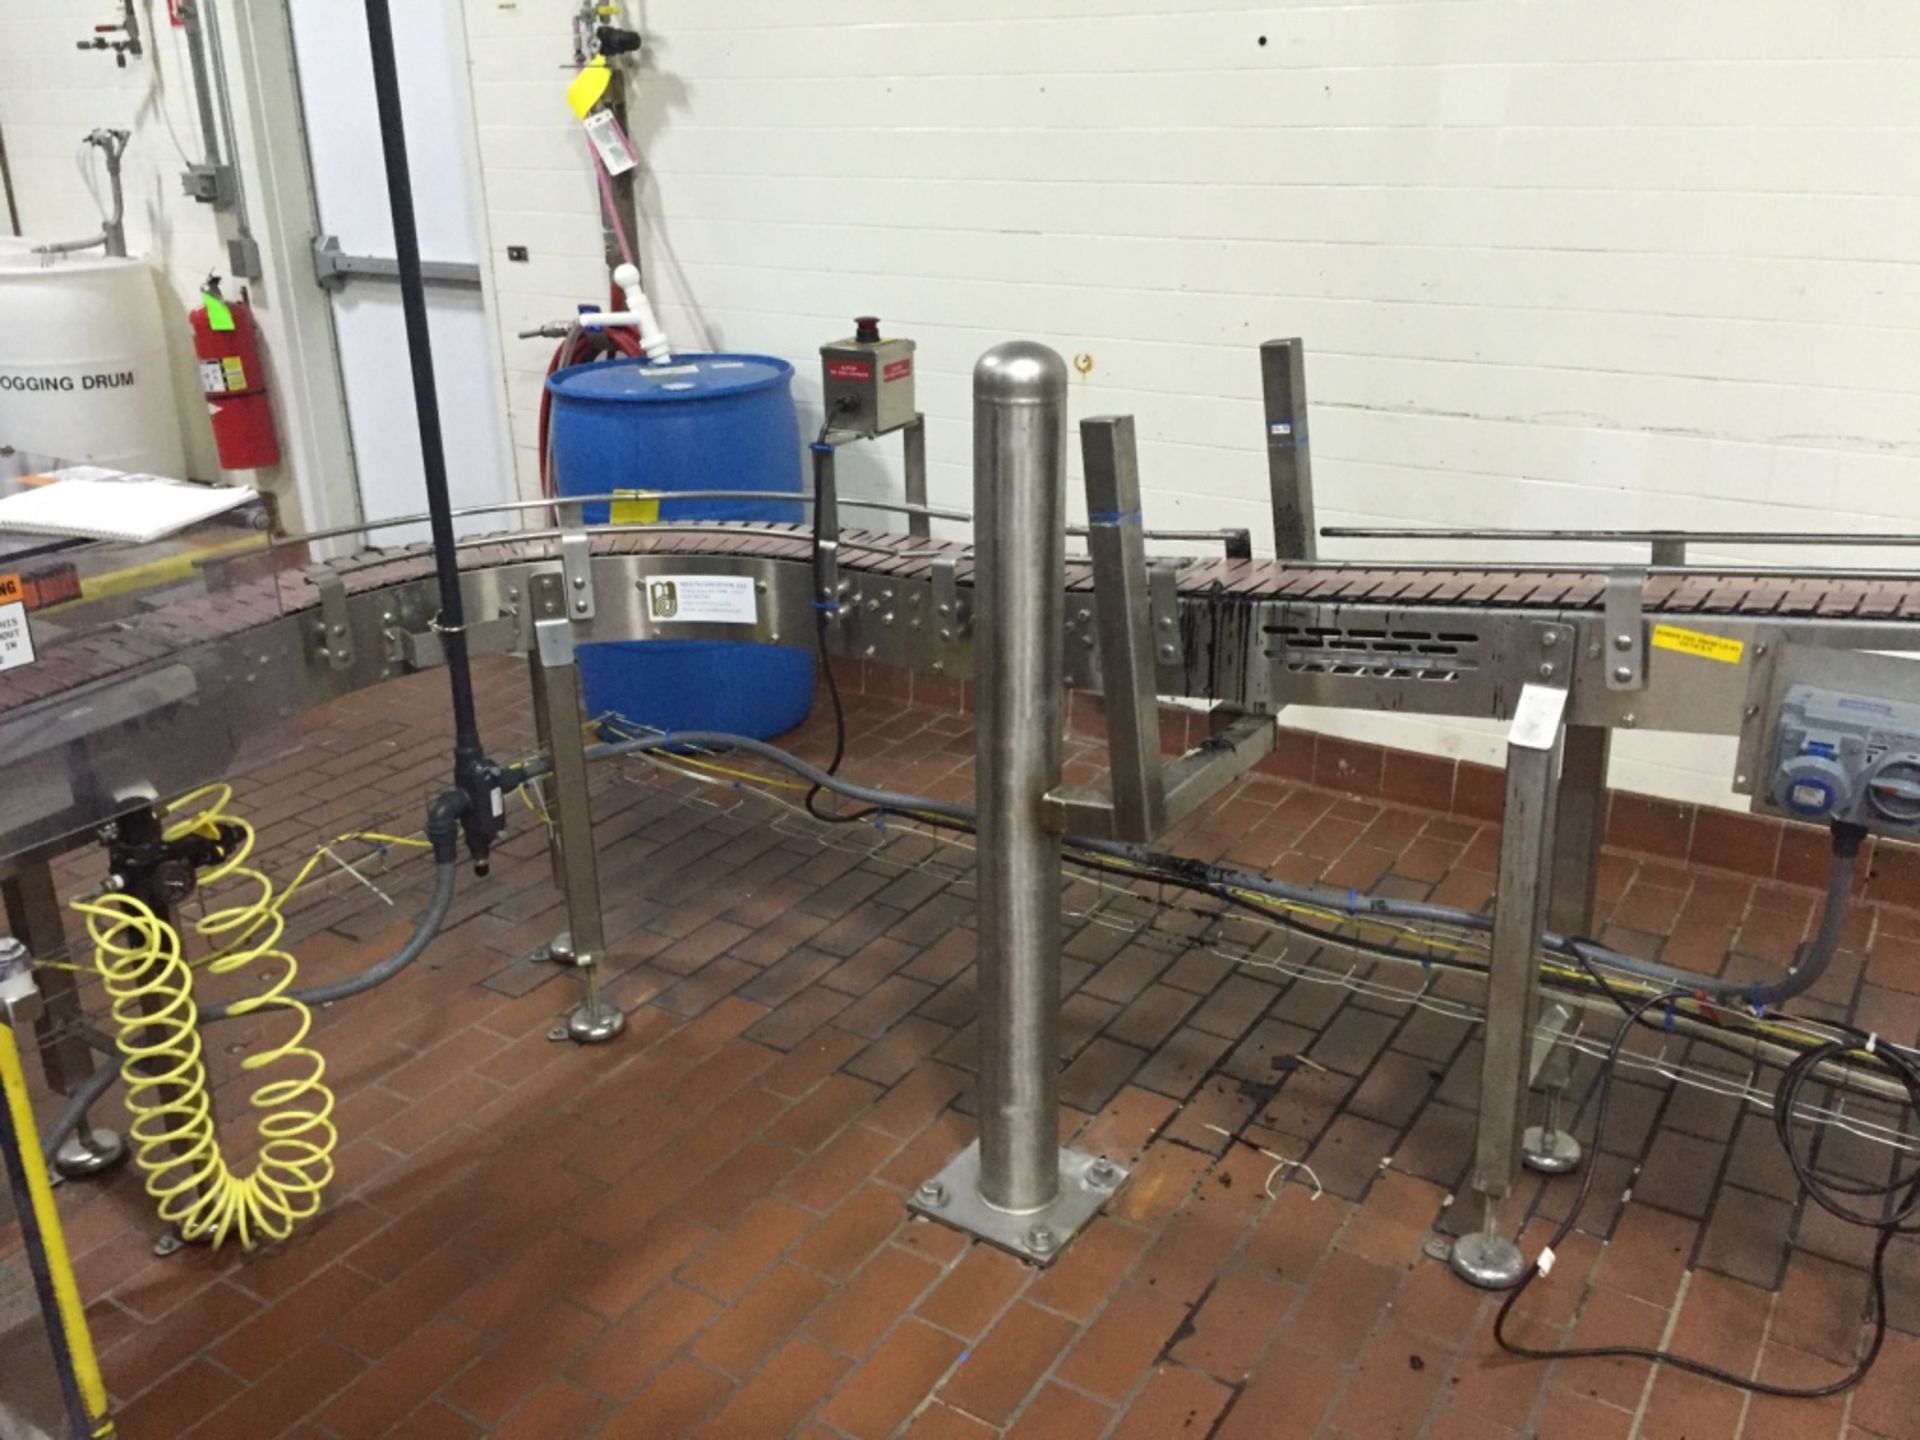 Stainless Product Conveyors 8" wide x approximate 15' long - Rigging Fee $150, If